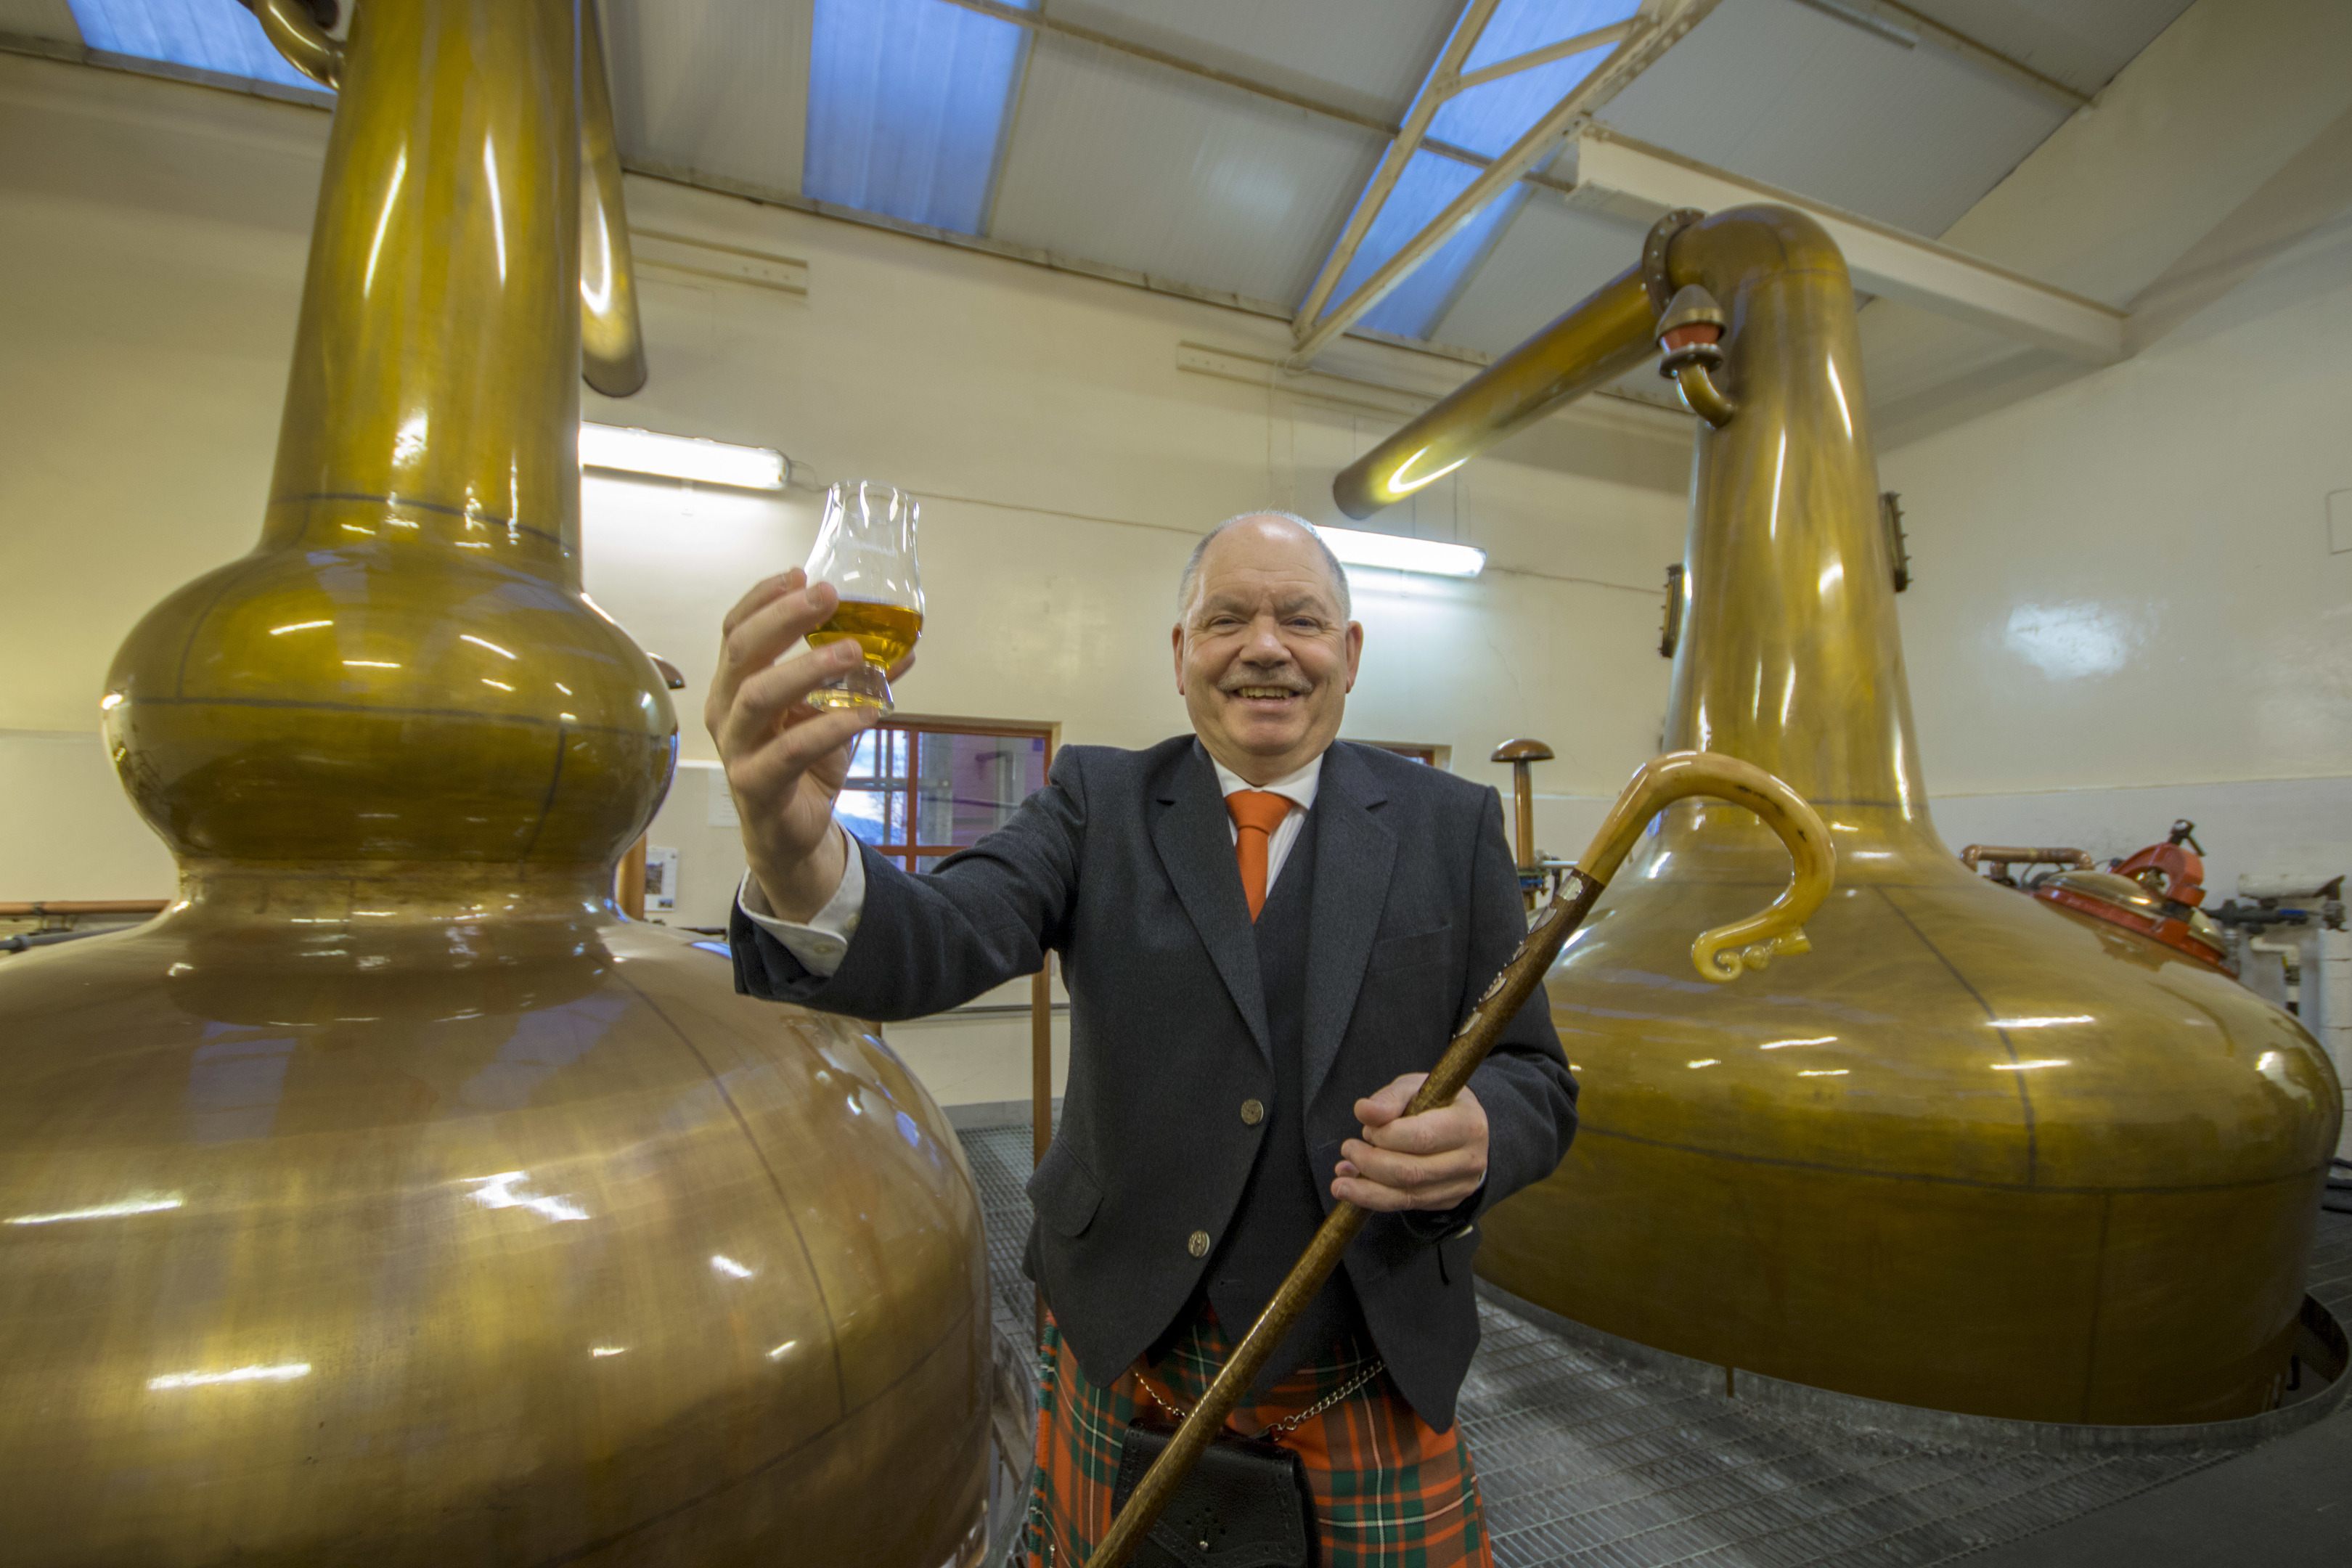 Alan James will be chieftain for the final Piping at Forres